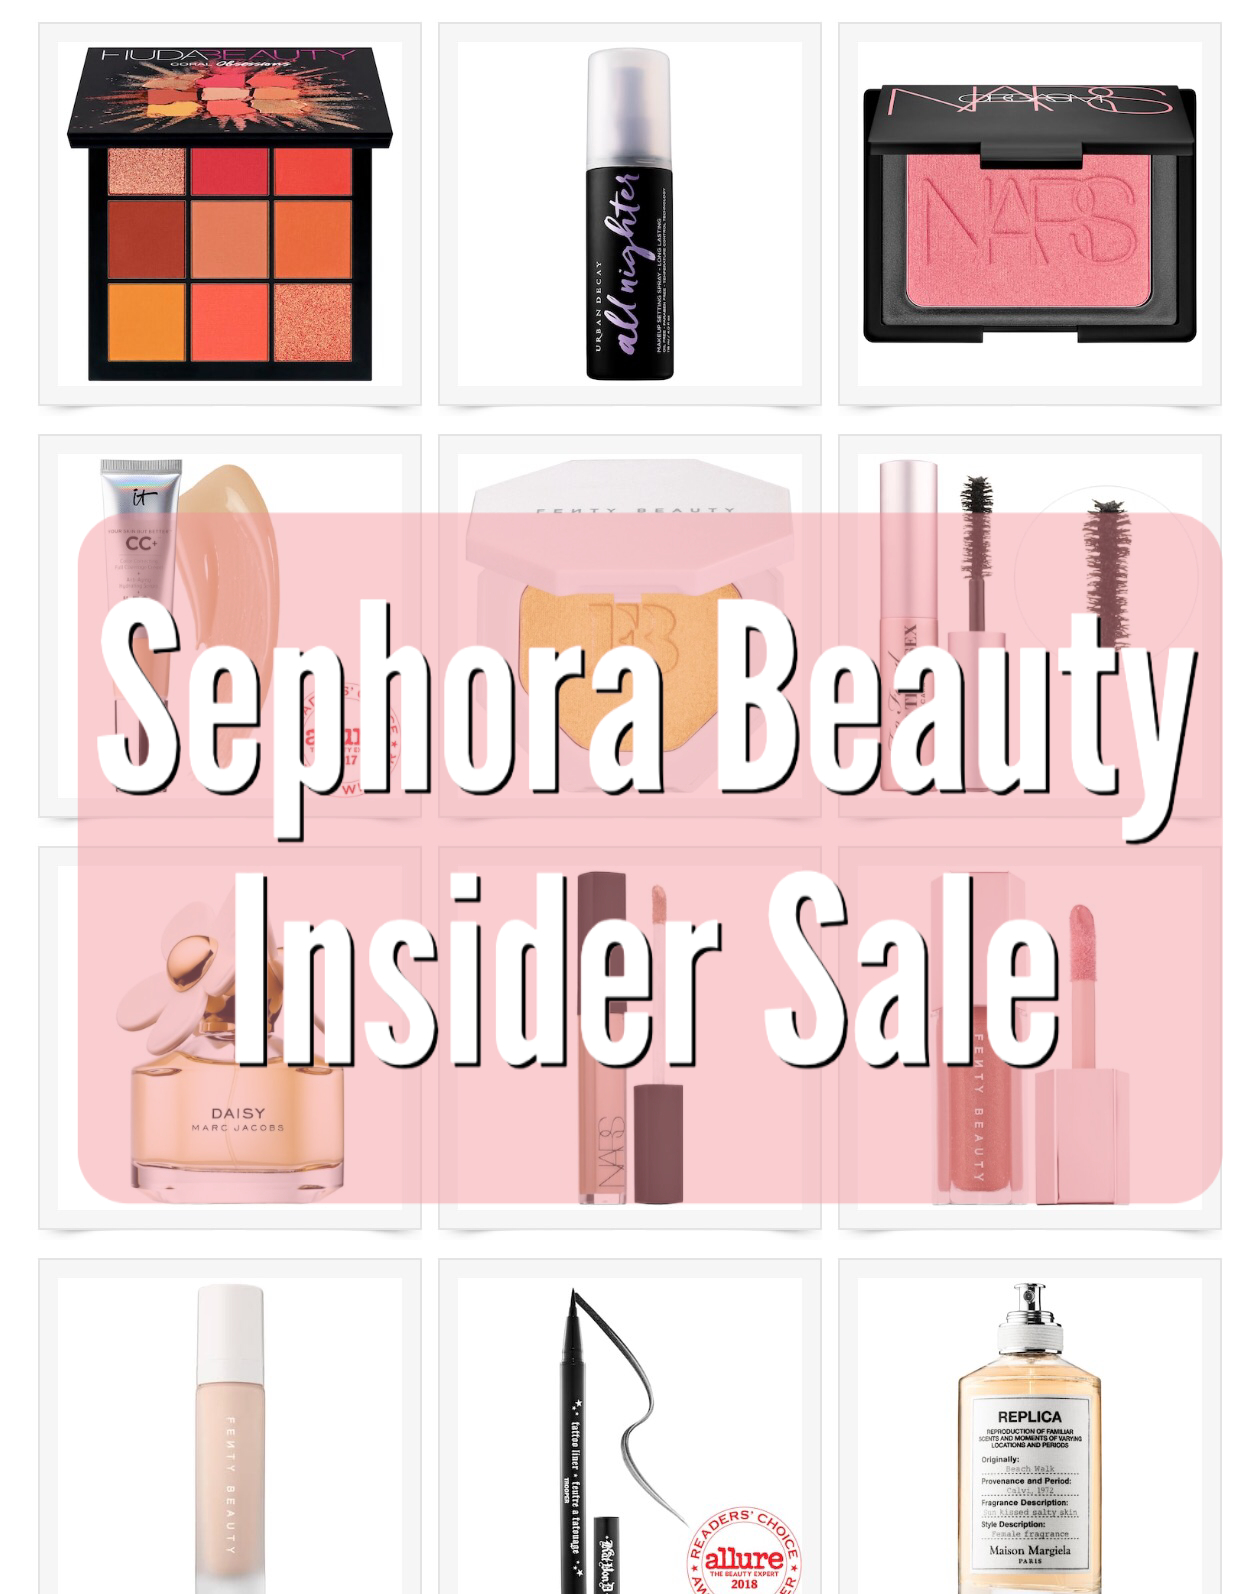 What You Should Get During The Sephora Beauty Insider Appreciation Sale by Jessica Linn from Linn Style